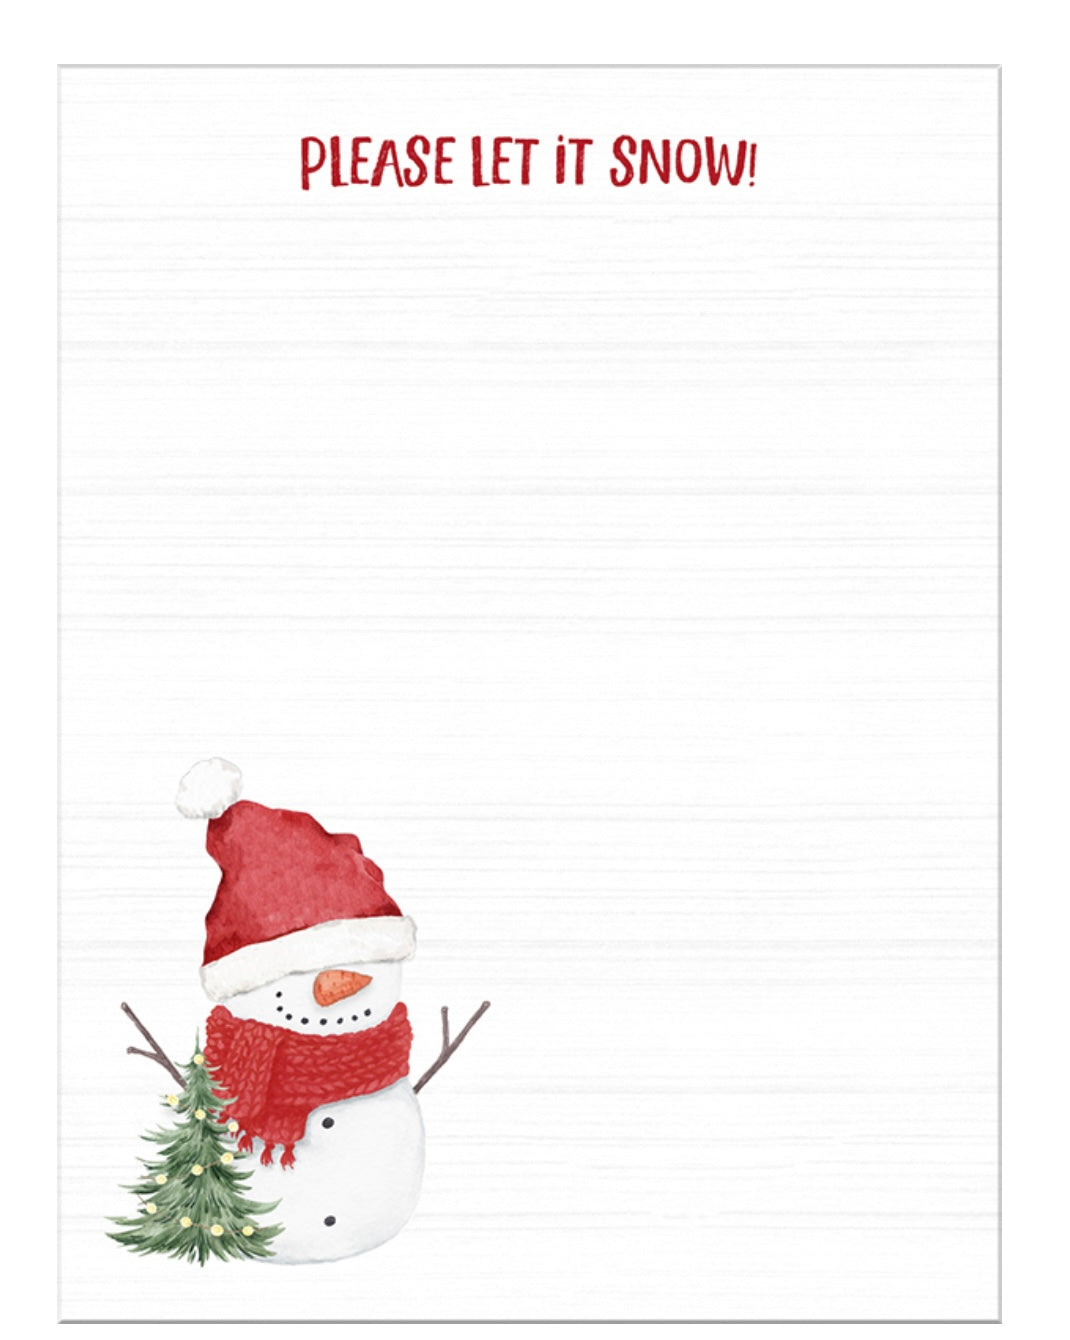 Let it Snow Notepad